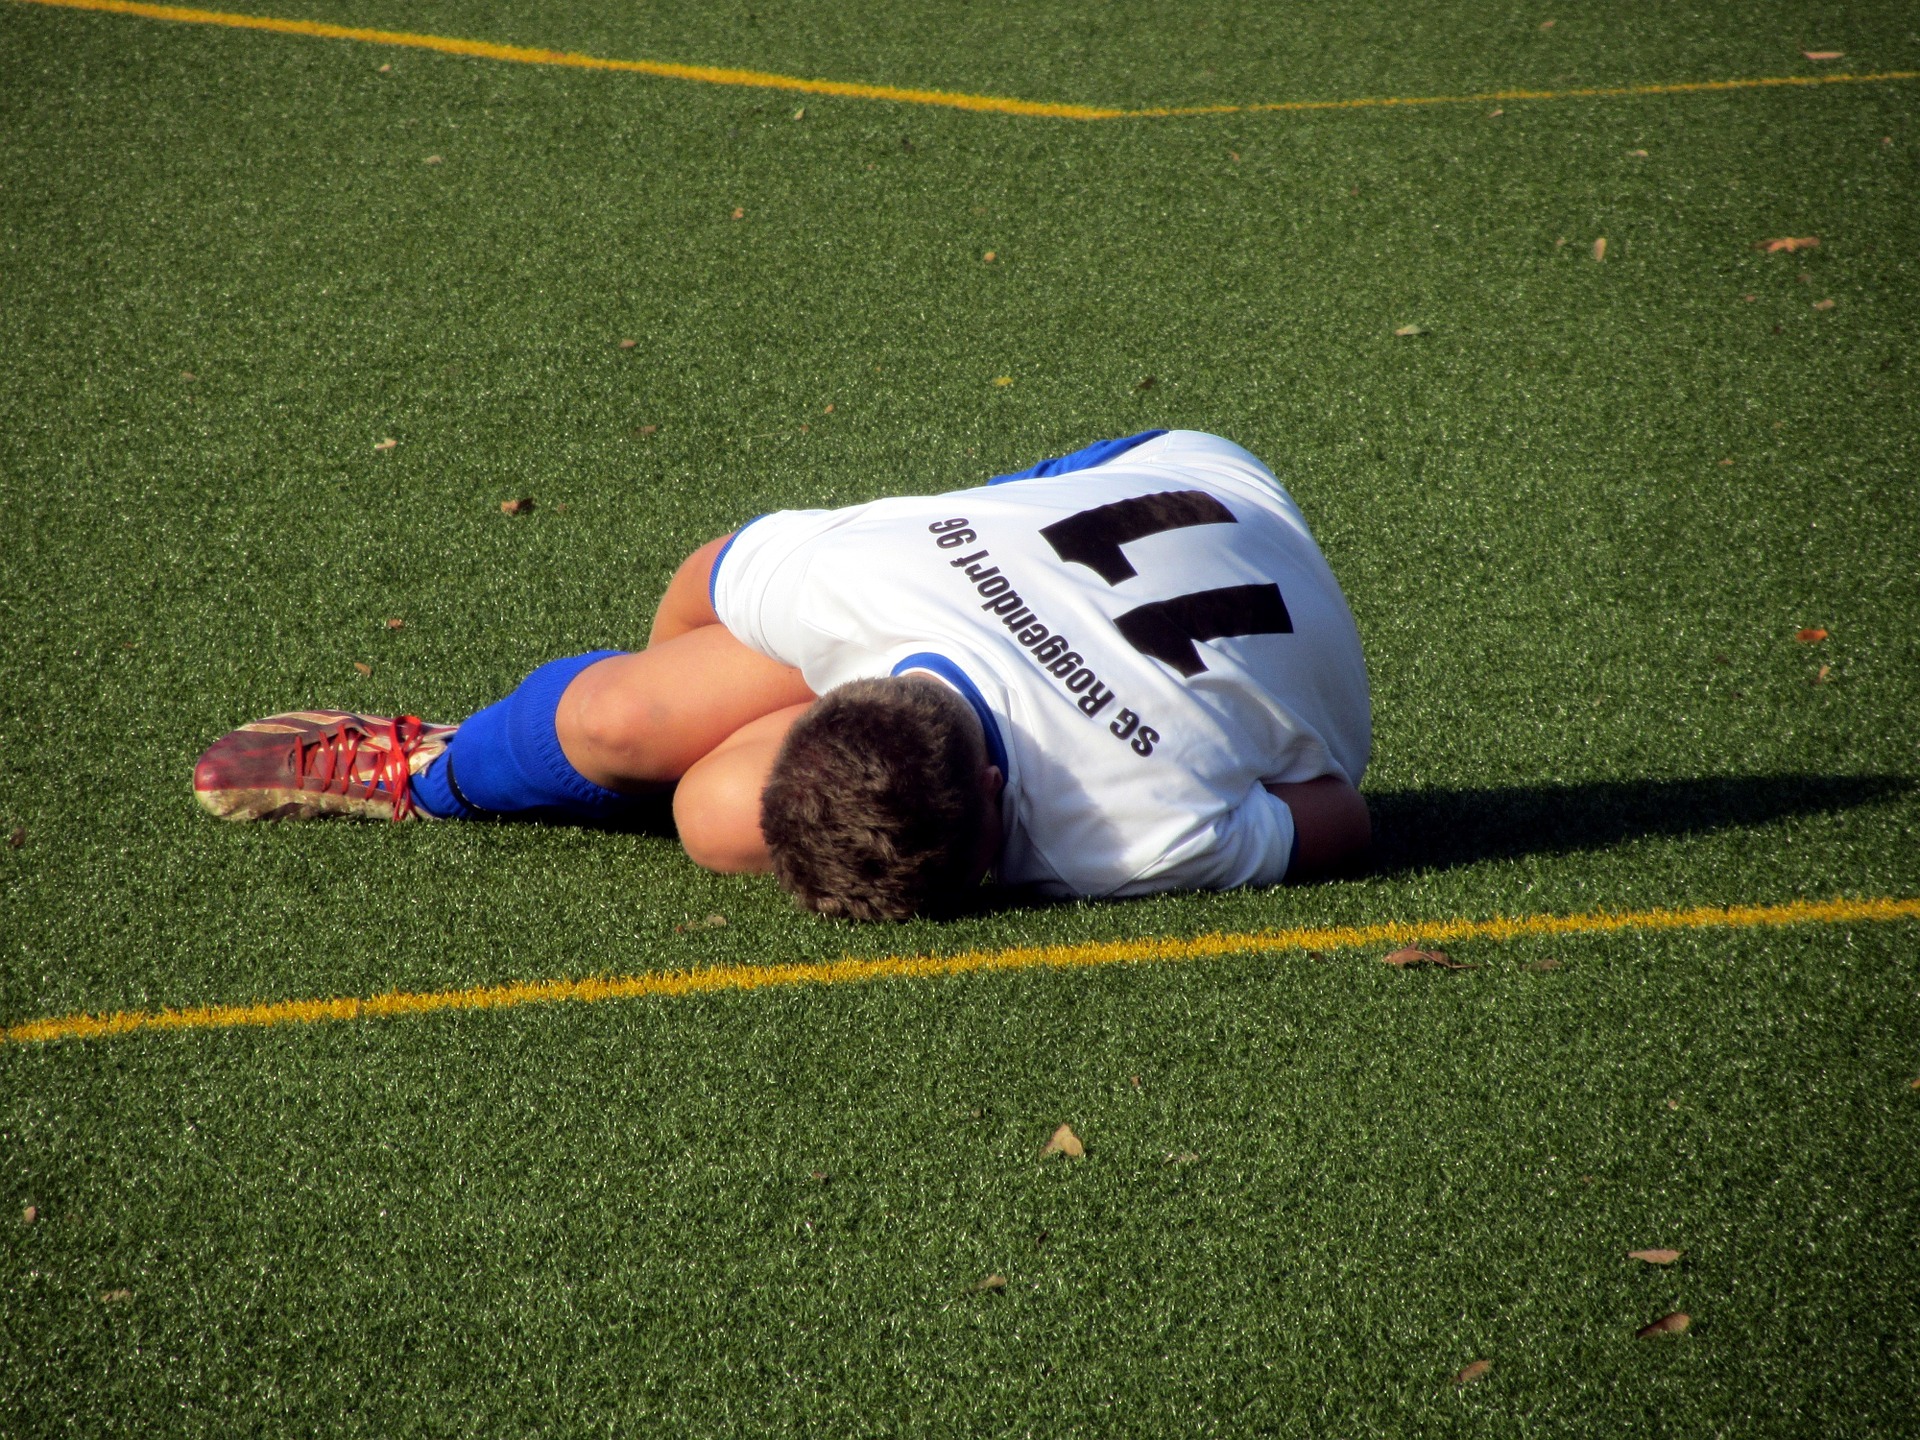 Fifa World Cup Elimination Round Kicks Off: What Are You Doing About Your Sports Injuries?